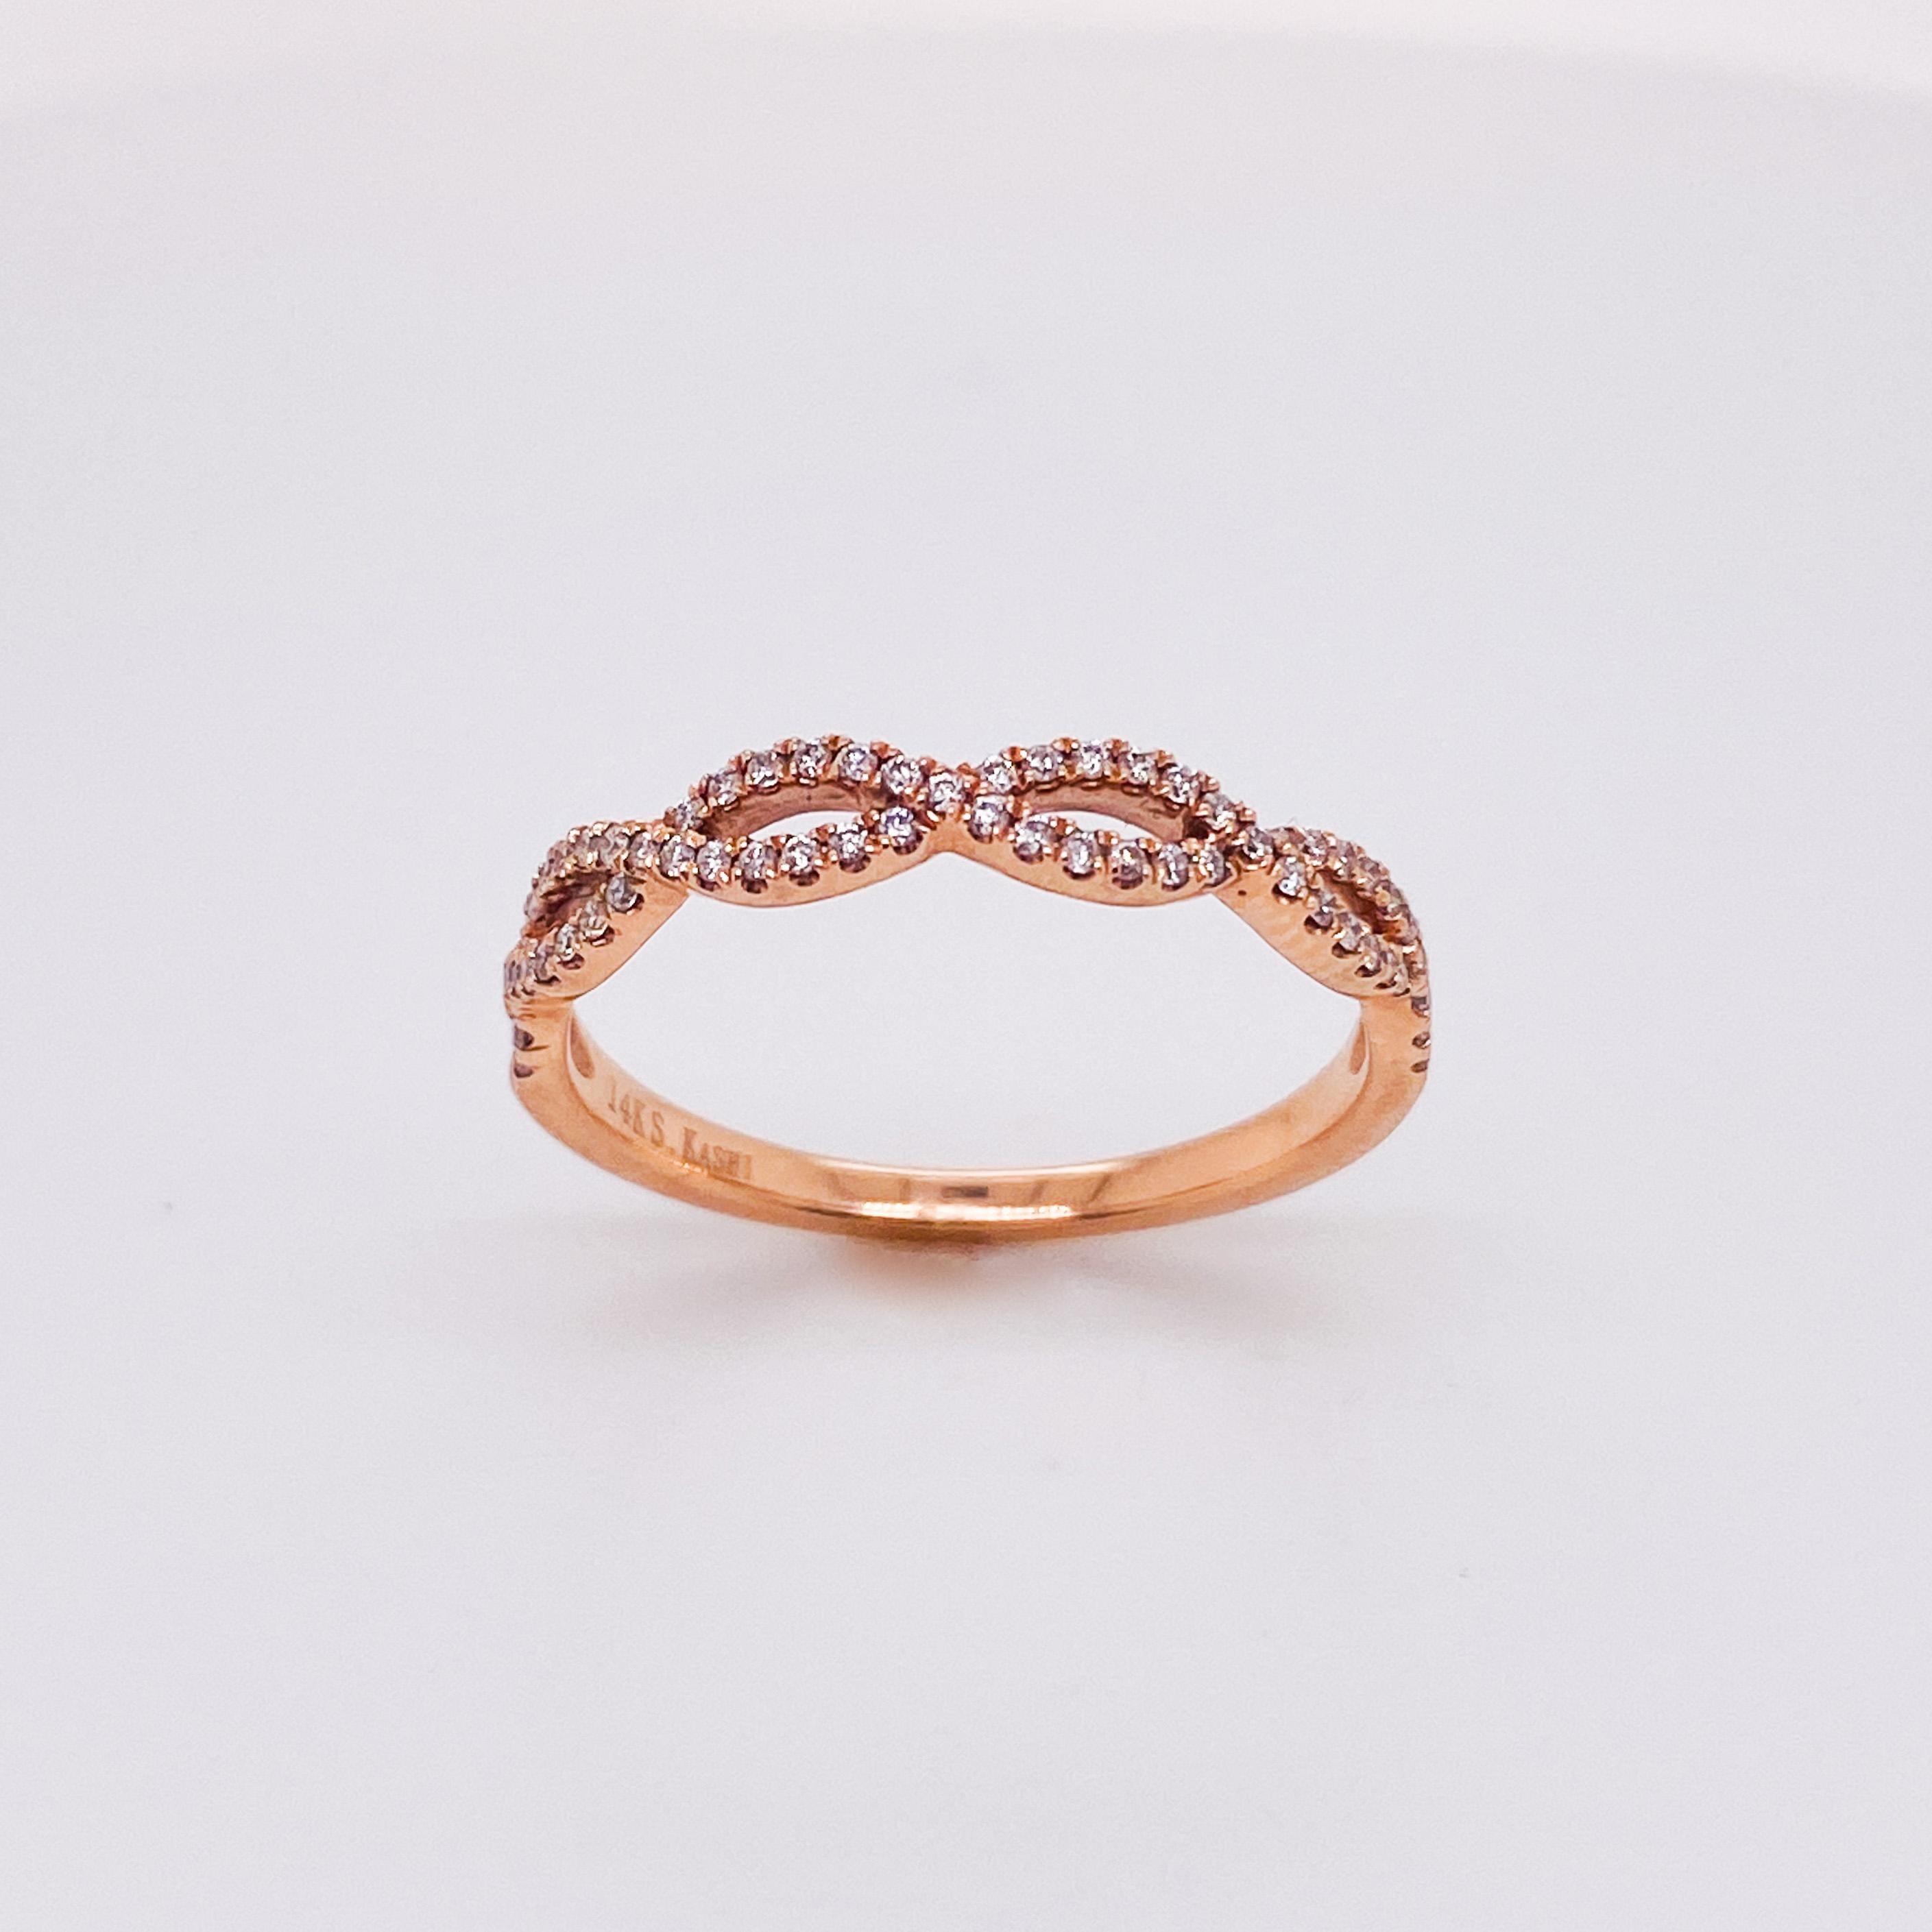 Contemporary Woven Criss-Cross Diamond Ring with 0.19cttw in 14k Rose Gold with Twist For Sale